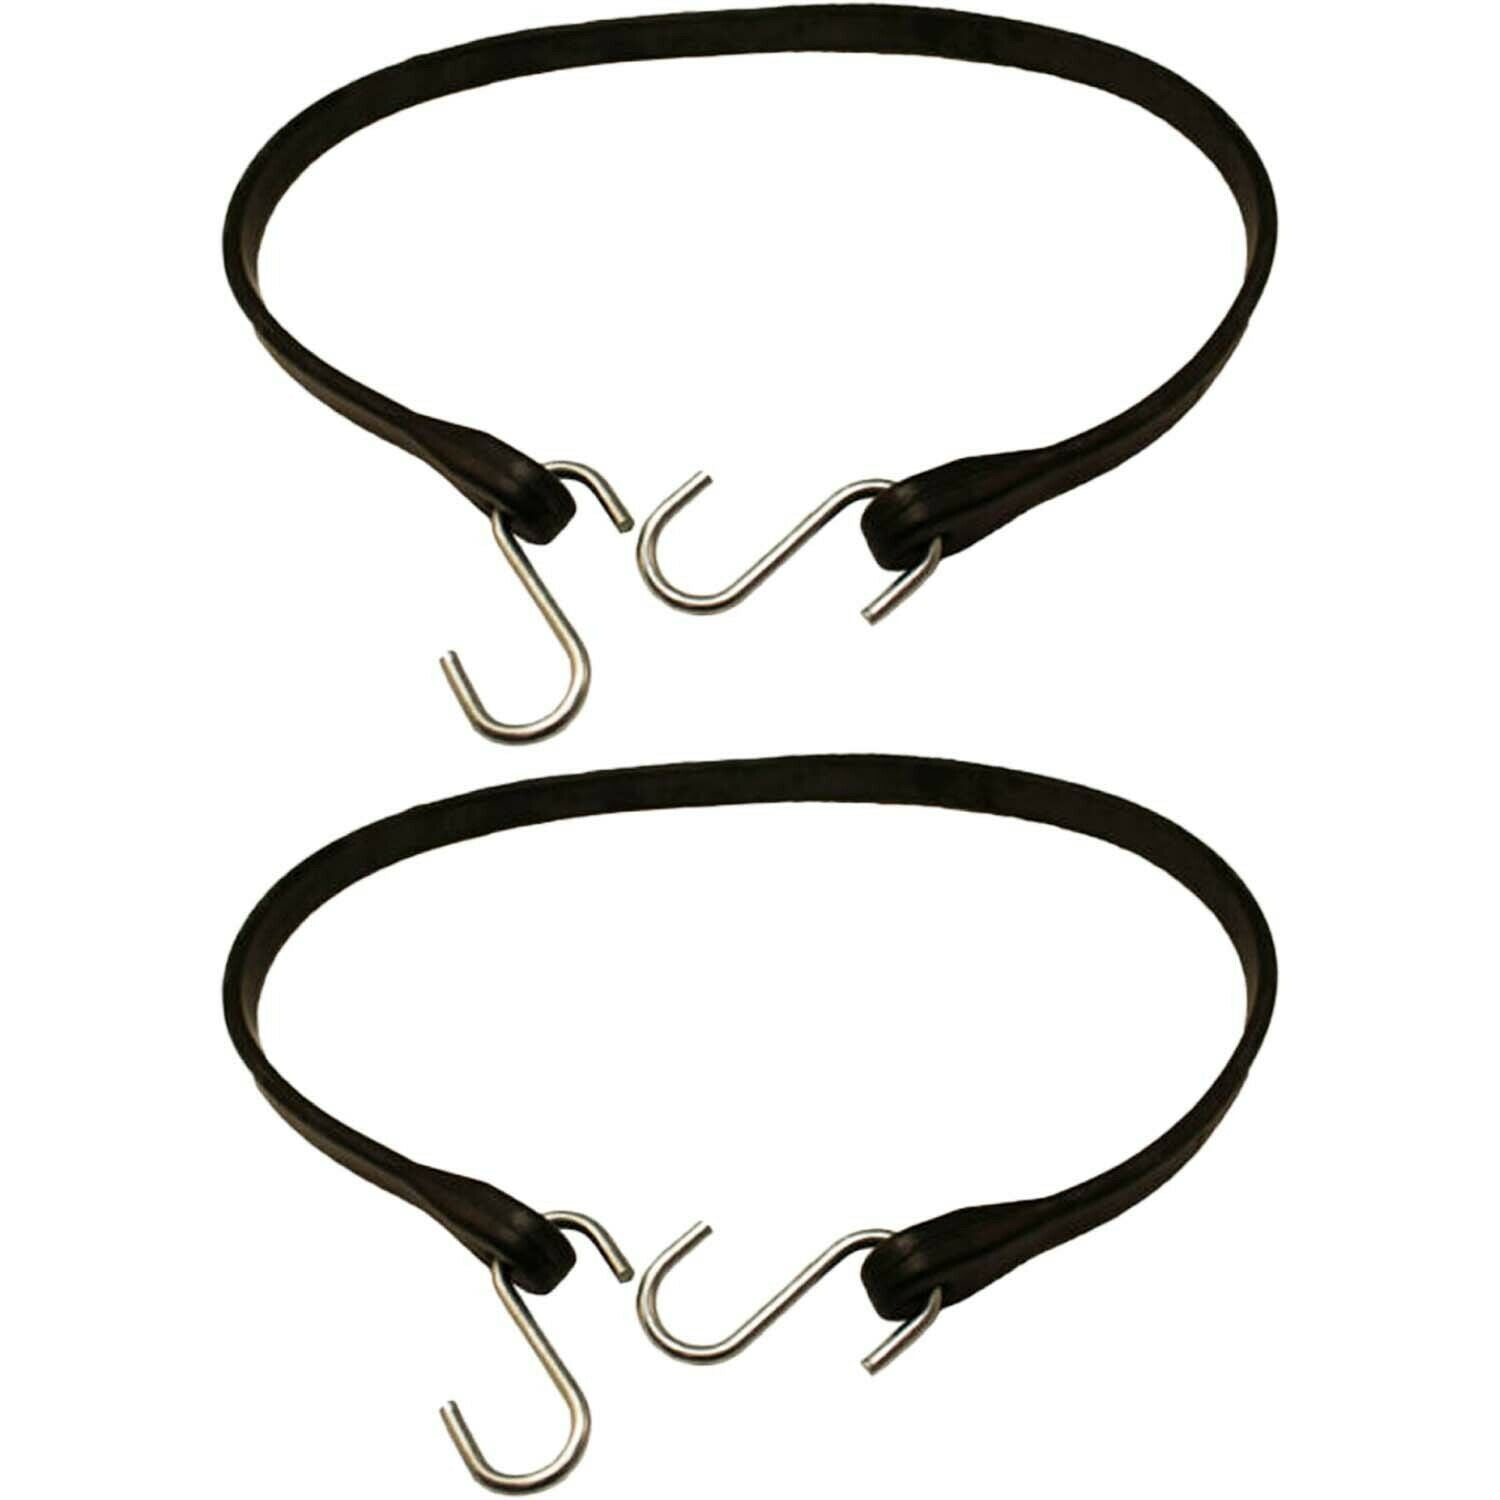 Peerless CC8421 21" EPDM Rubber Bungee Tarp Strap with Hooks Pack of 2